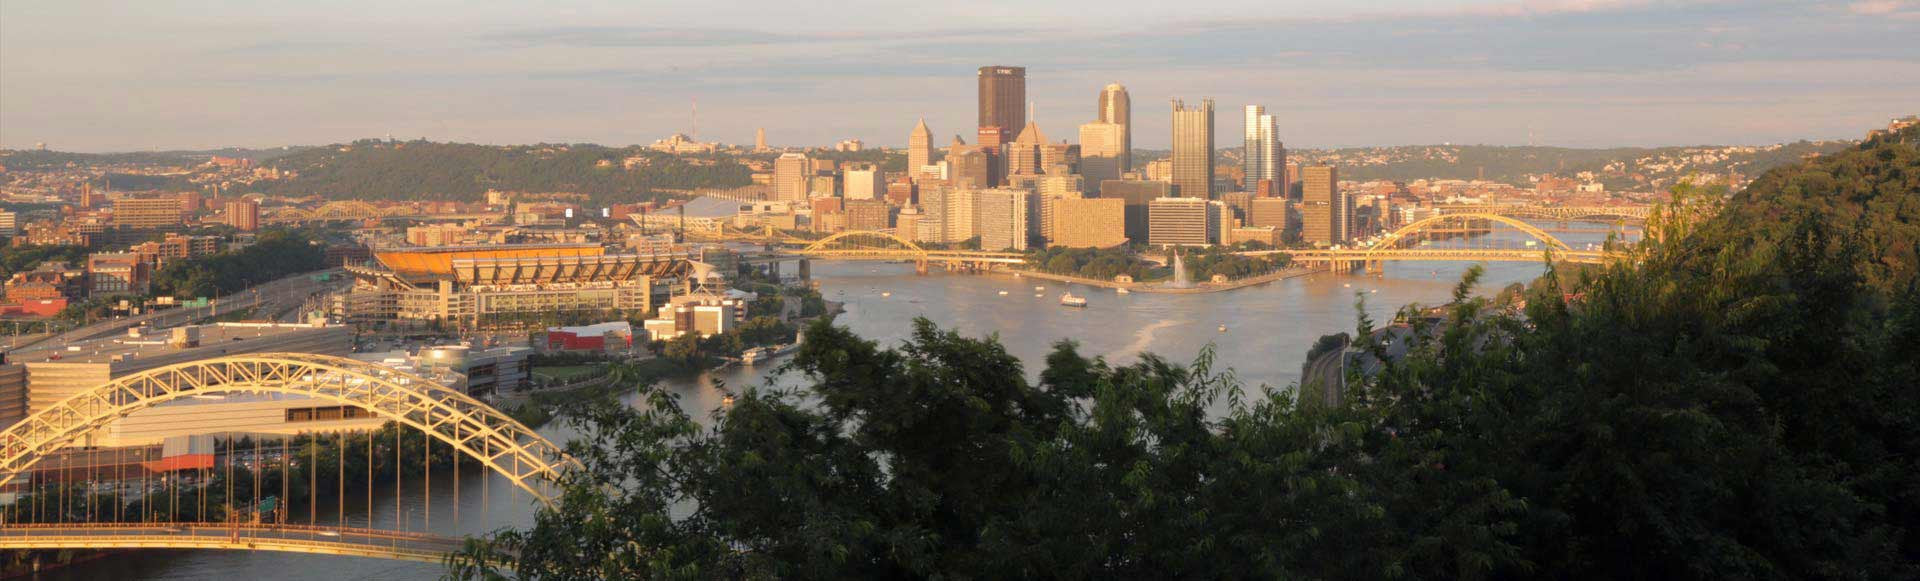 view of downtown pittsburgh from the west end overlook